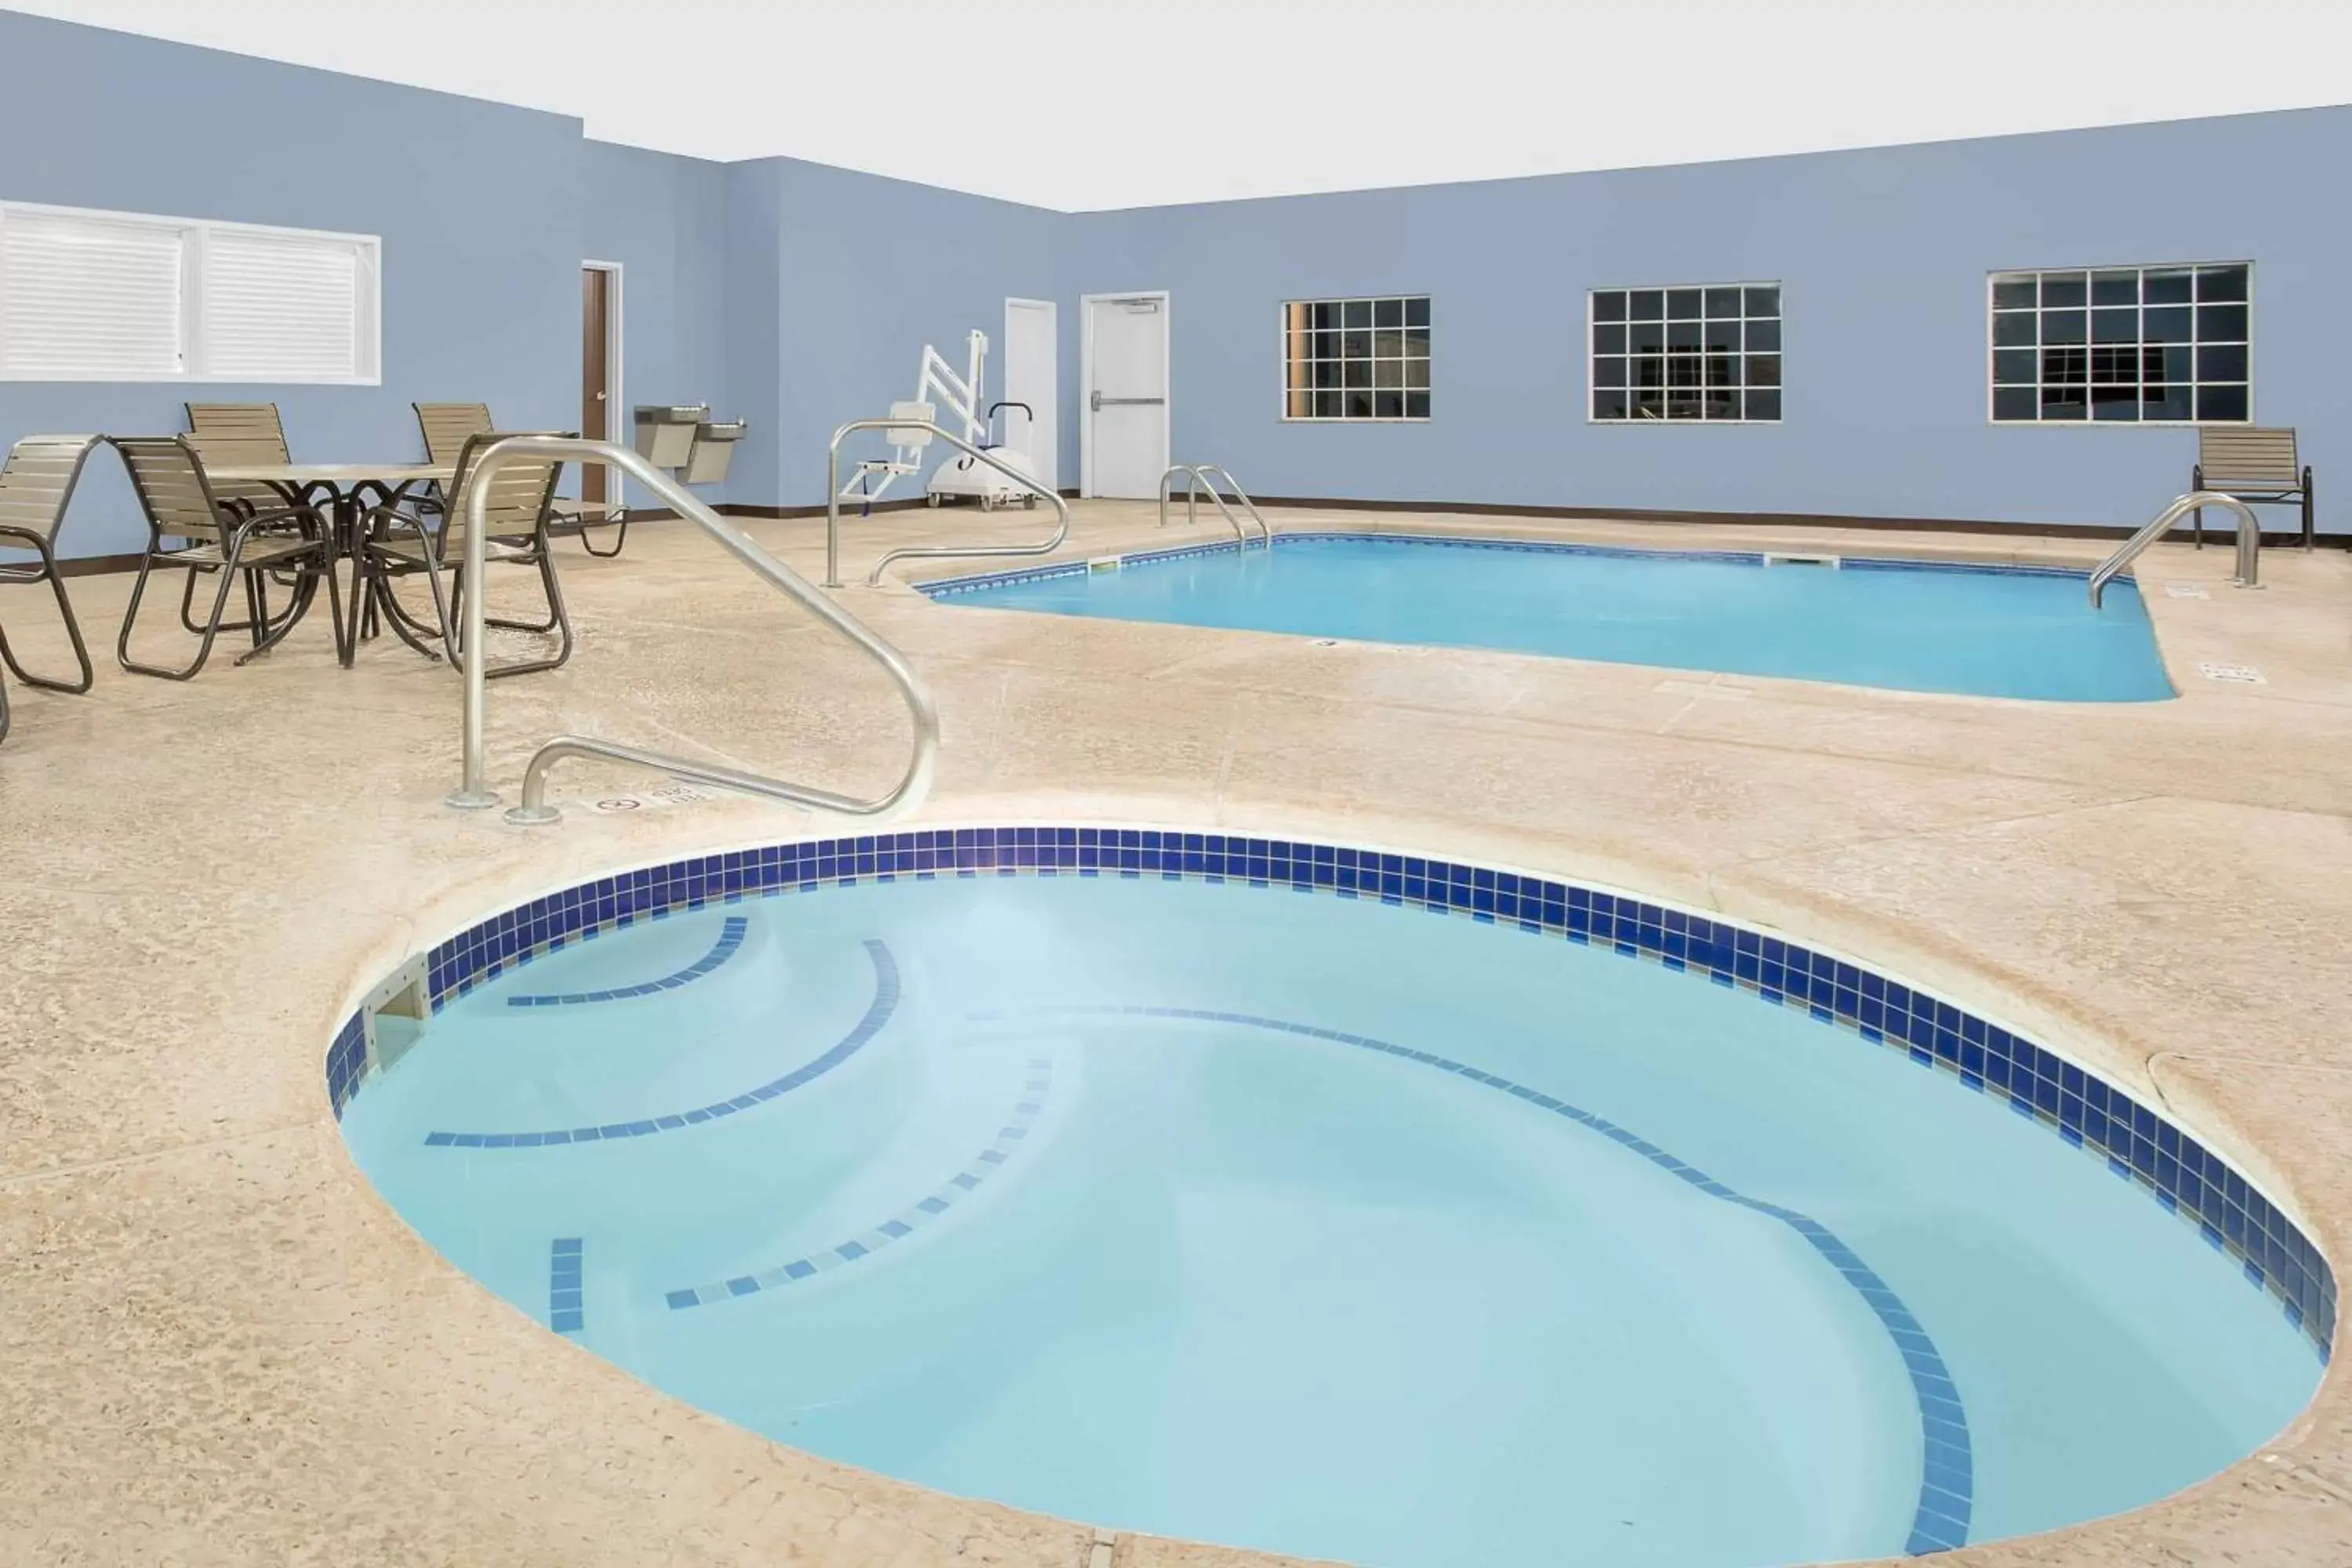 Hot Tub, Swimming Pool in Microtel Inn & Suites Mansfield PA